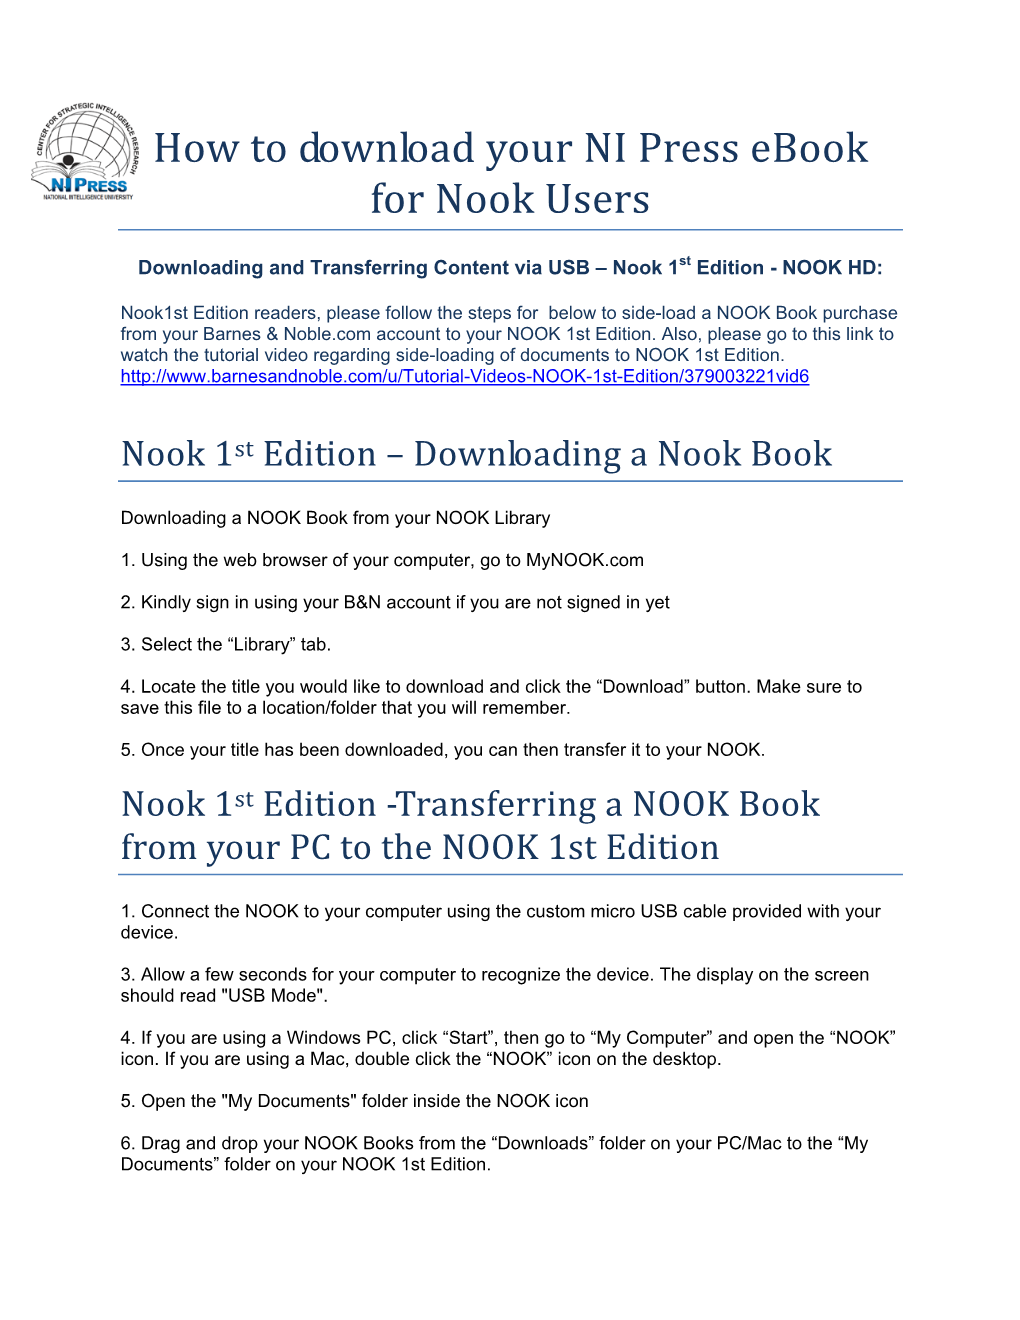 How to Download Your NI Press Ebook for Nook Users